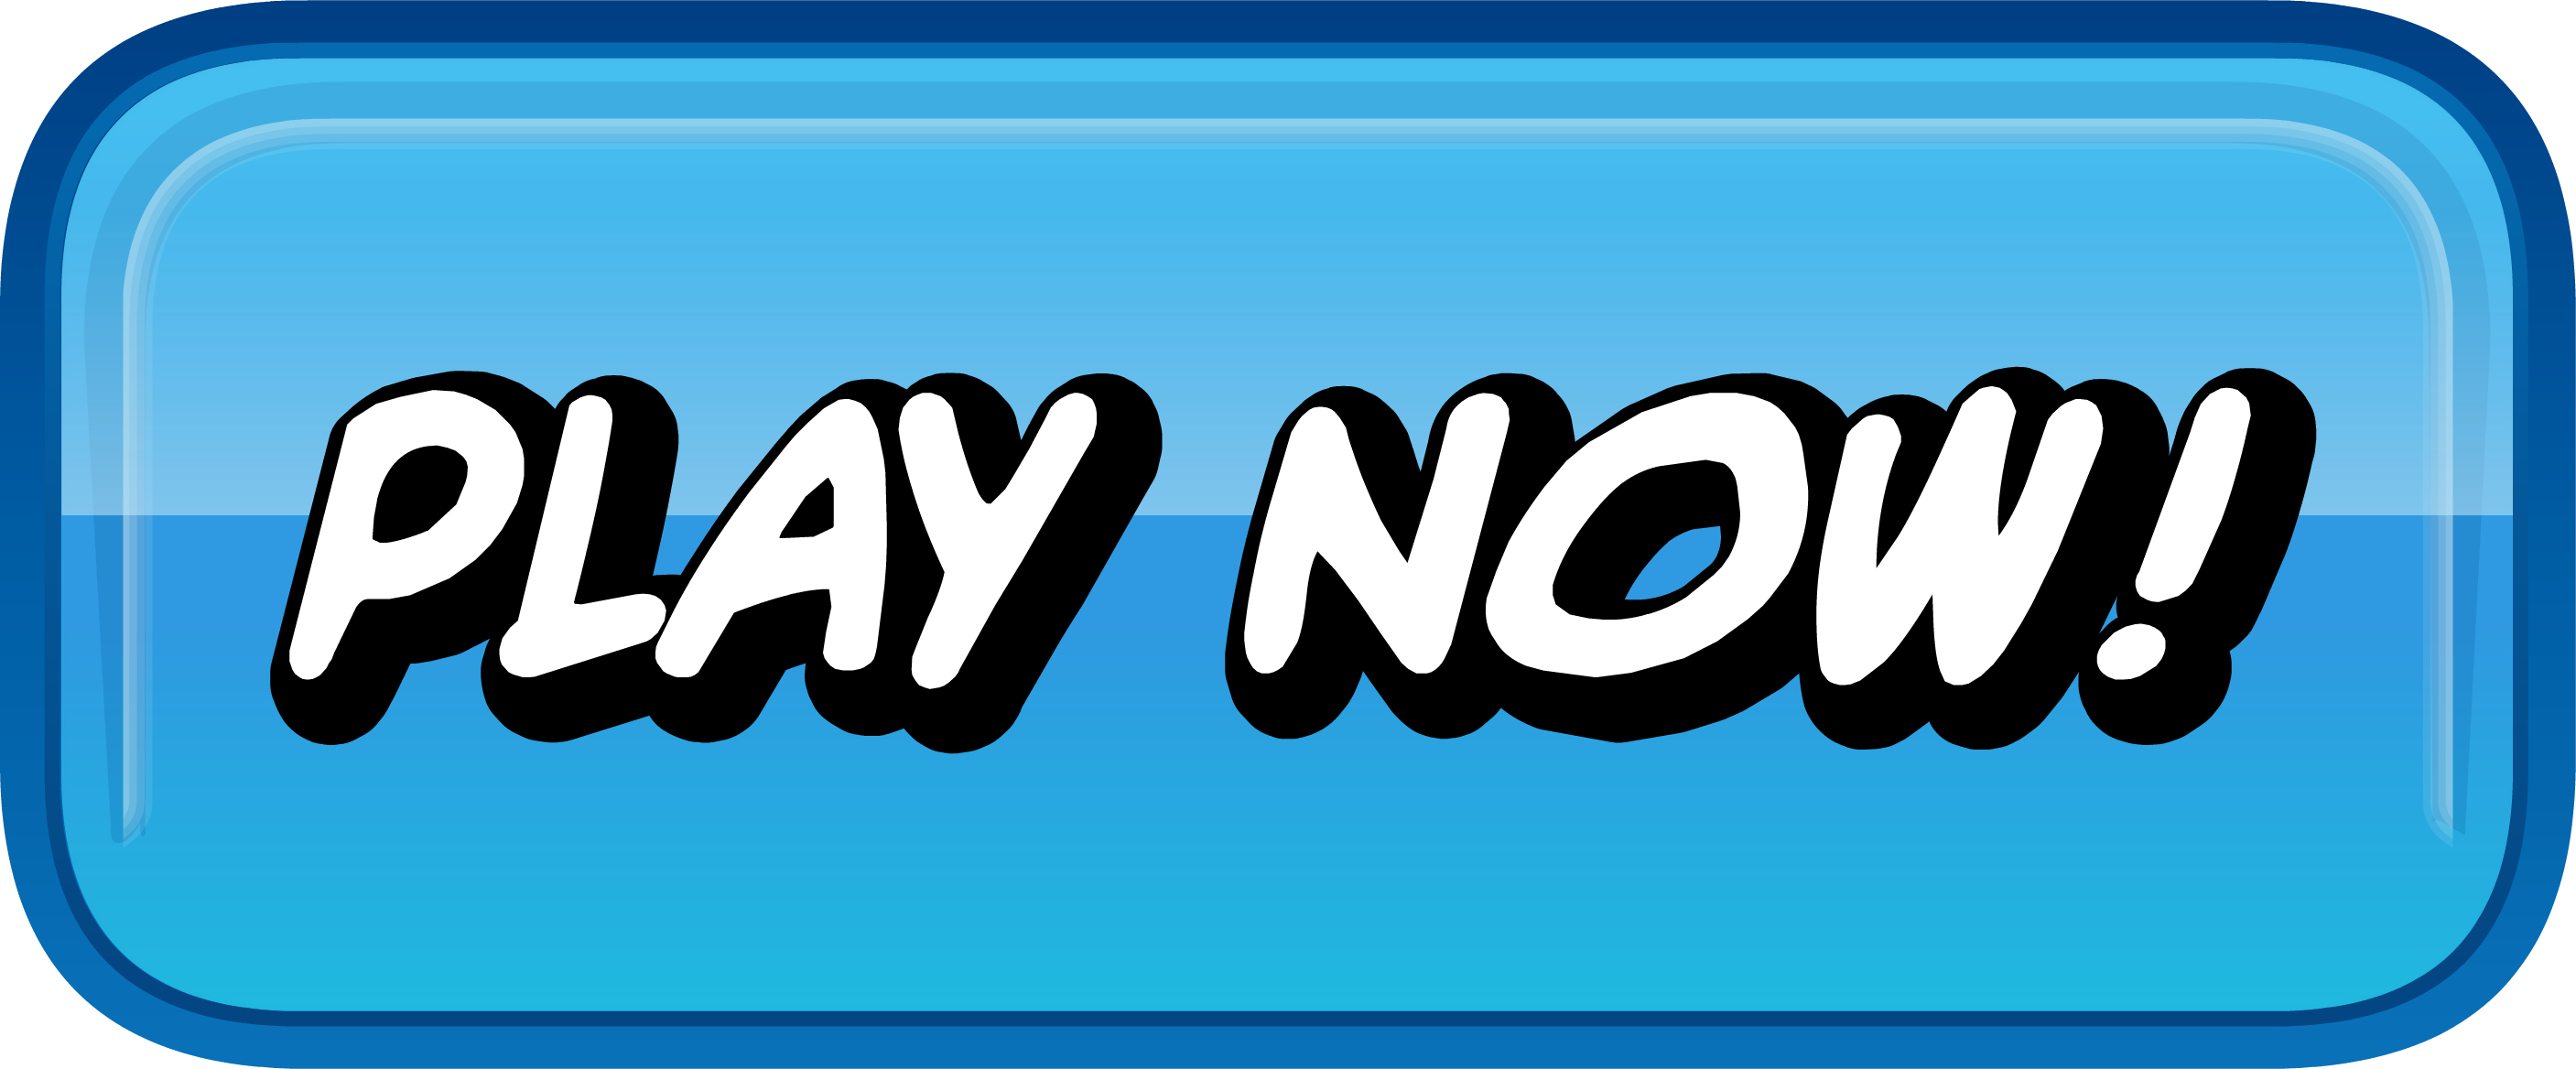 Download PNG image - Play Now Button PNG Photos 